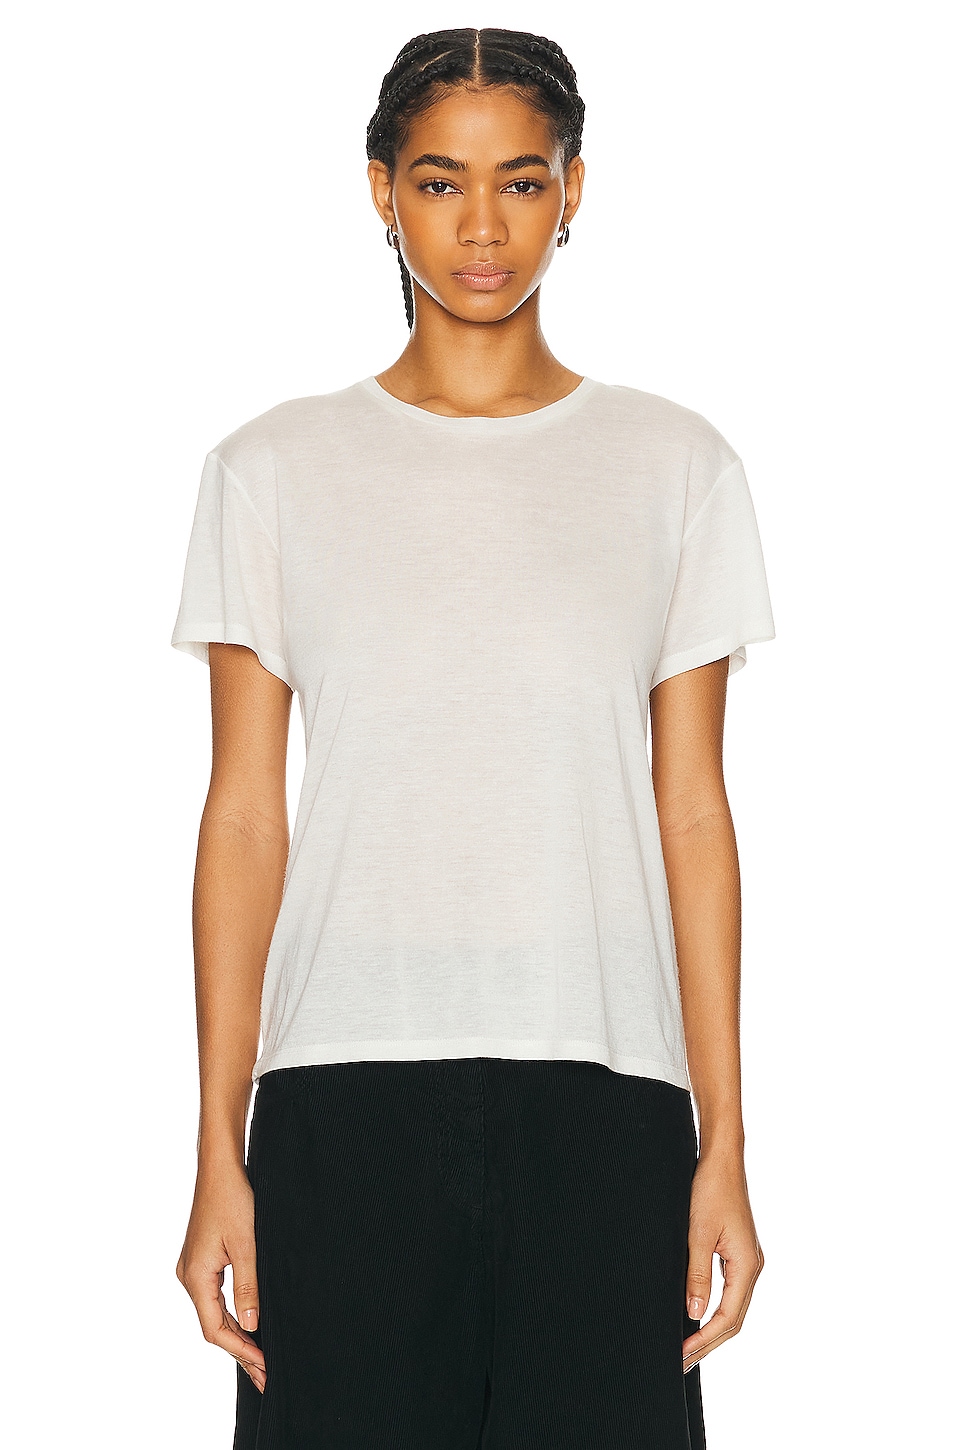 Image 1 of The Row Niteroi Top in OFF WHITE